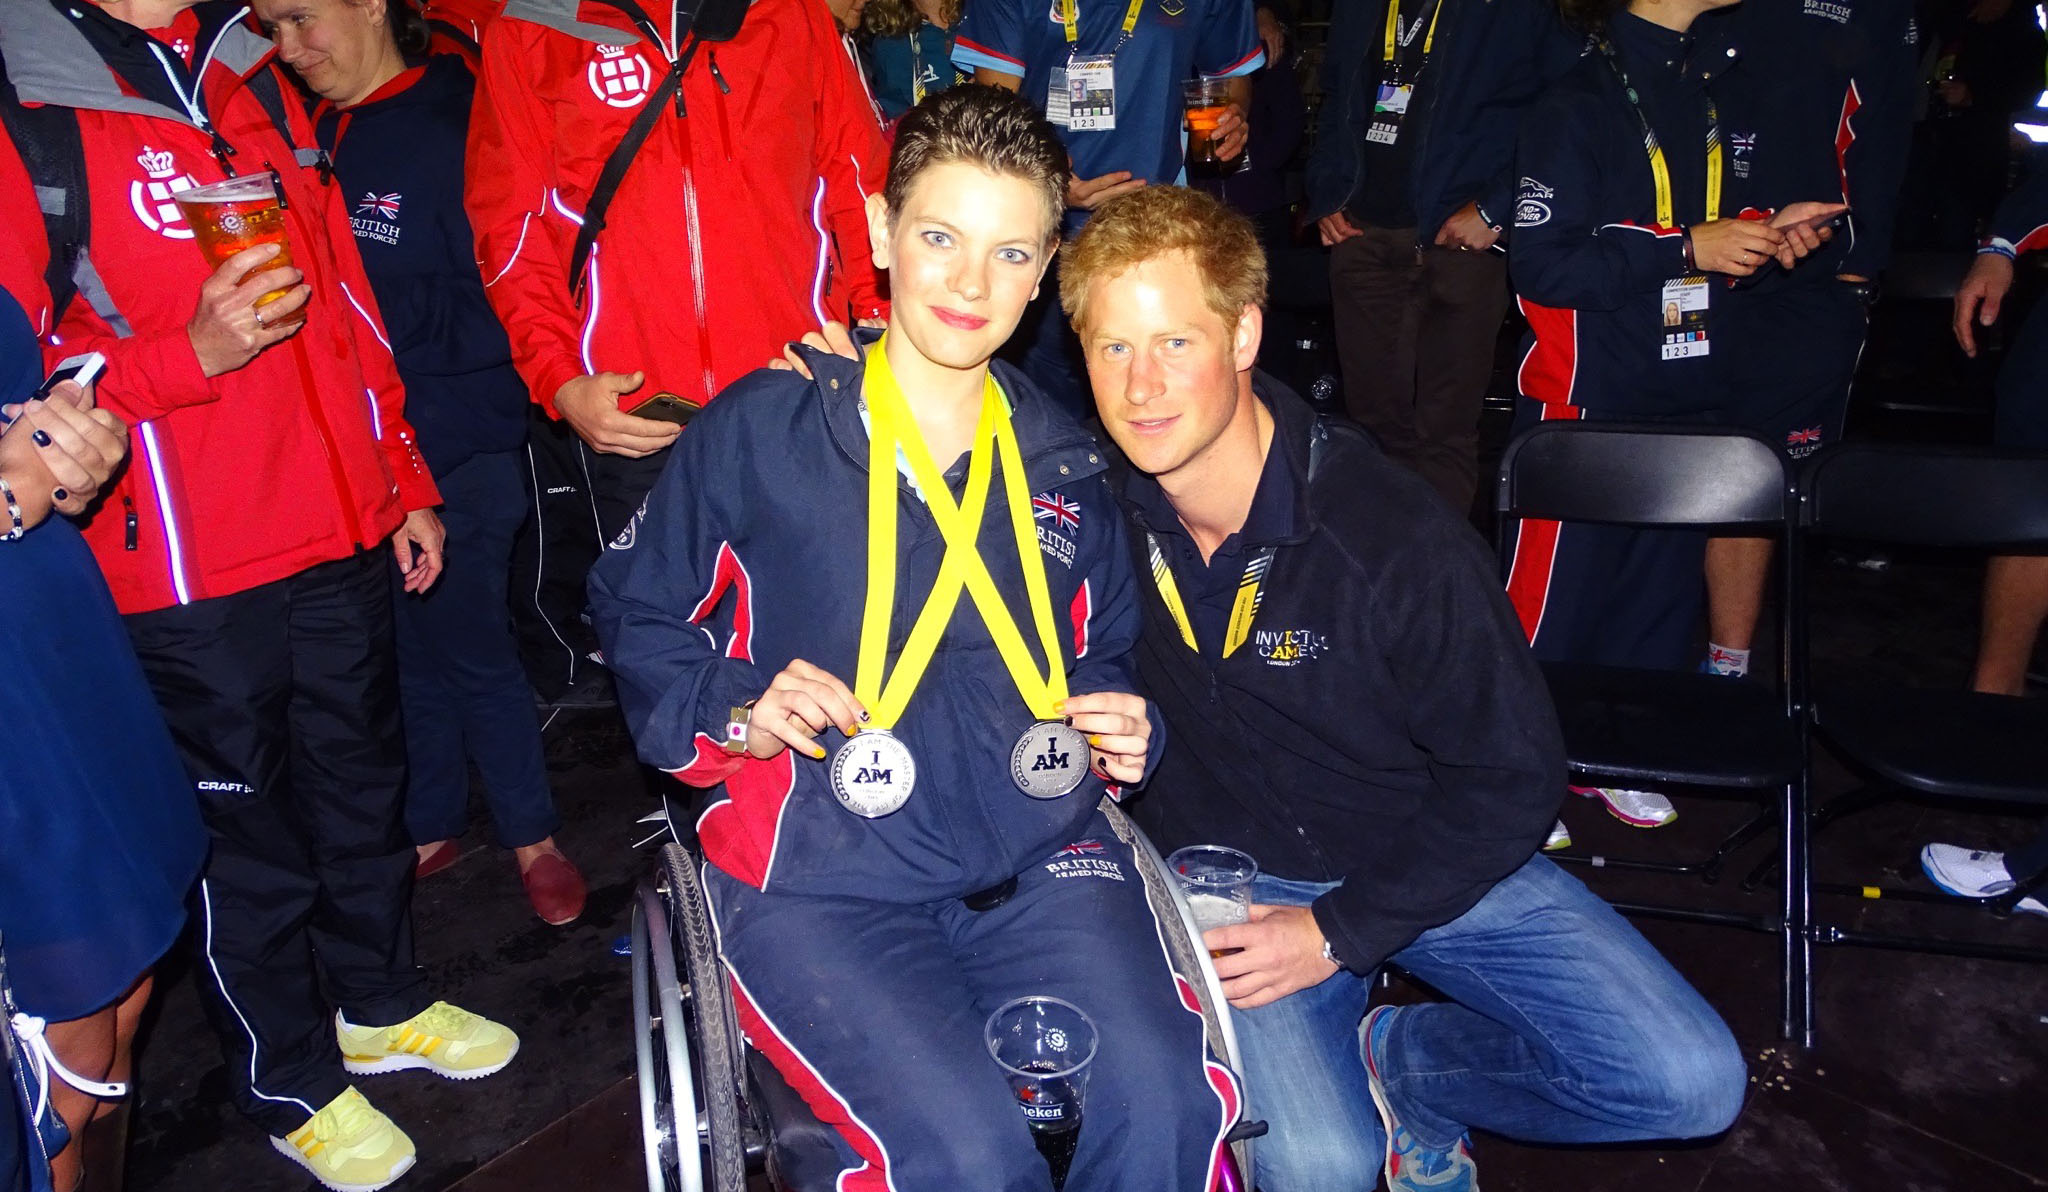 Susan Cook with Prince Harry, holding her silver medals.